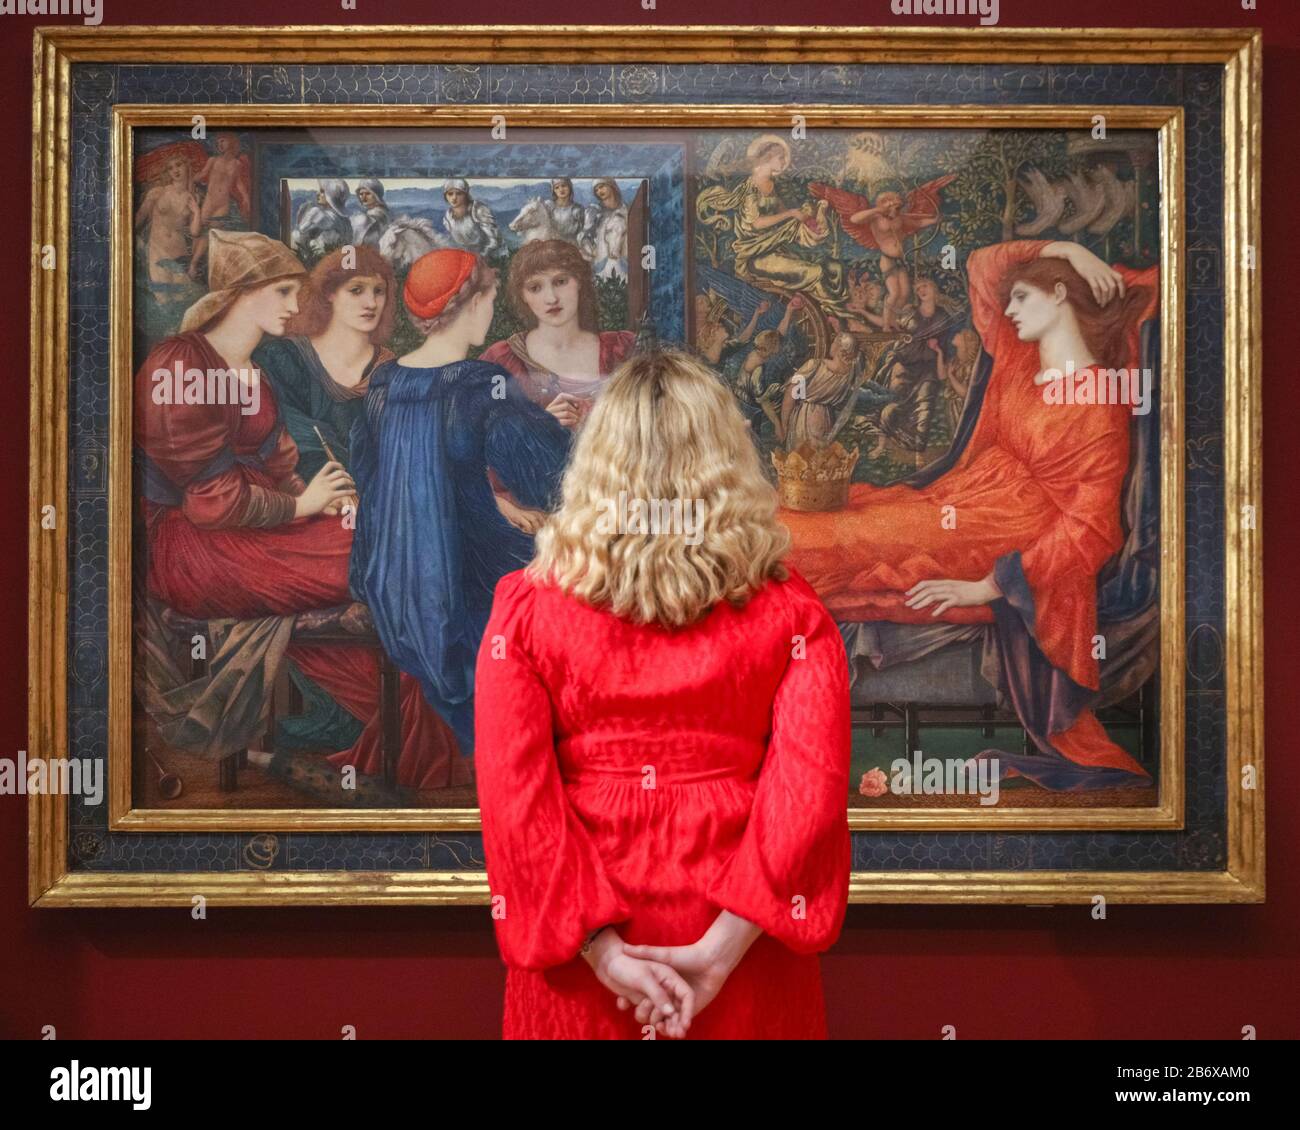 London, UK. 12th Mar, 2020. An assistant poses with Edward Burne-Jones' 'Laus Veneris', 1873-75. 'The Enchanted Interior', challenges the historic depiction of women in art with Pre-Raphaelite and contemporary female artists' works. The exhibition runs 13th March to 14th June, 2020. Credit: Imageplotter/Alamy Live News Stock Photo